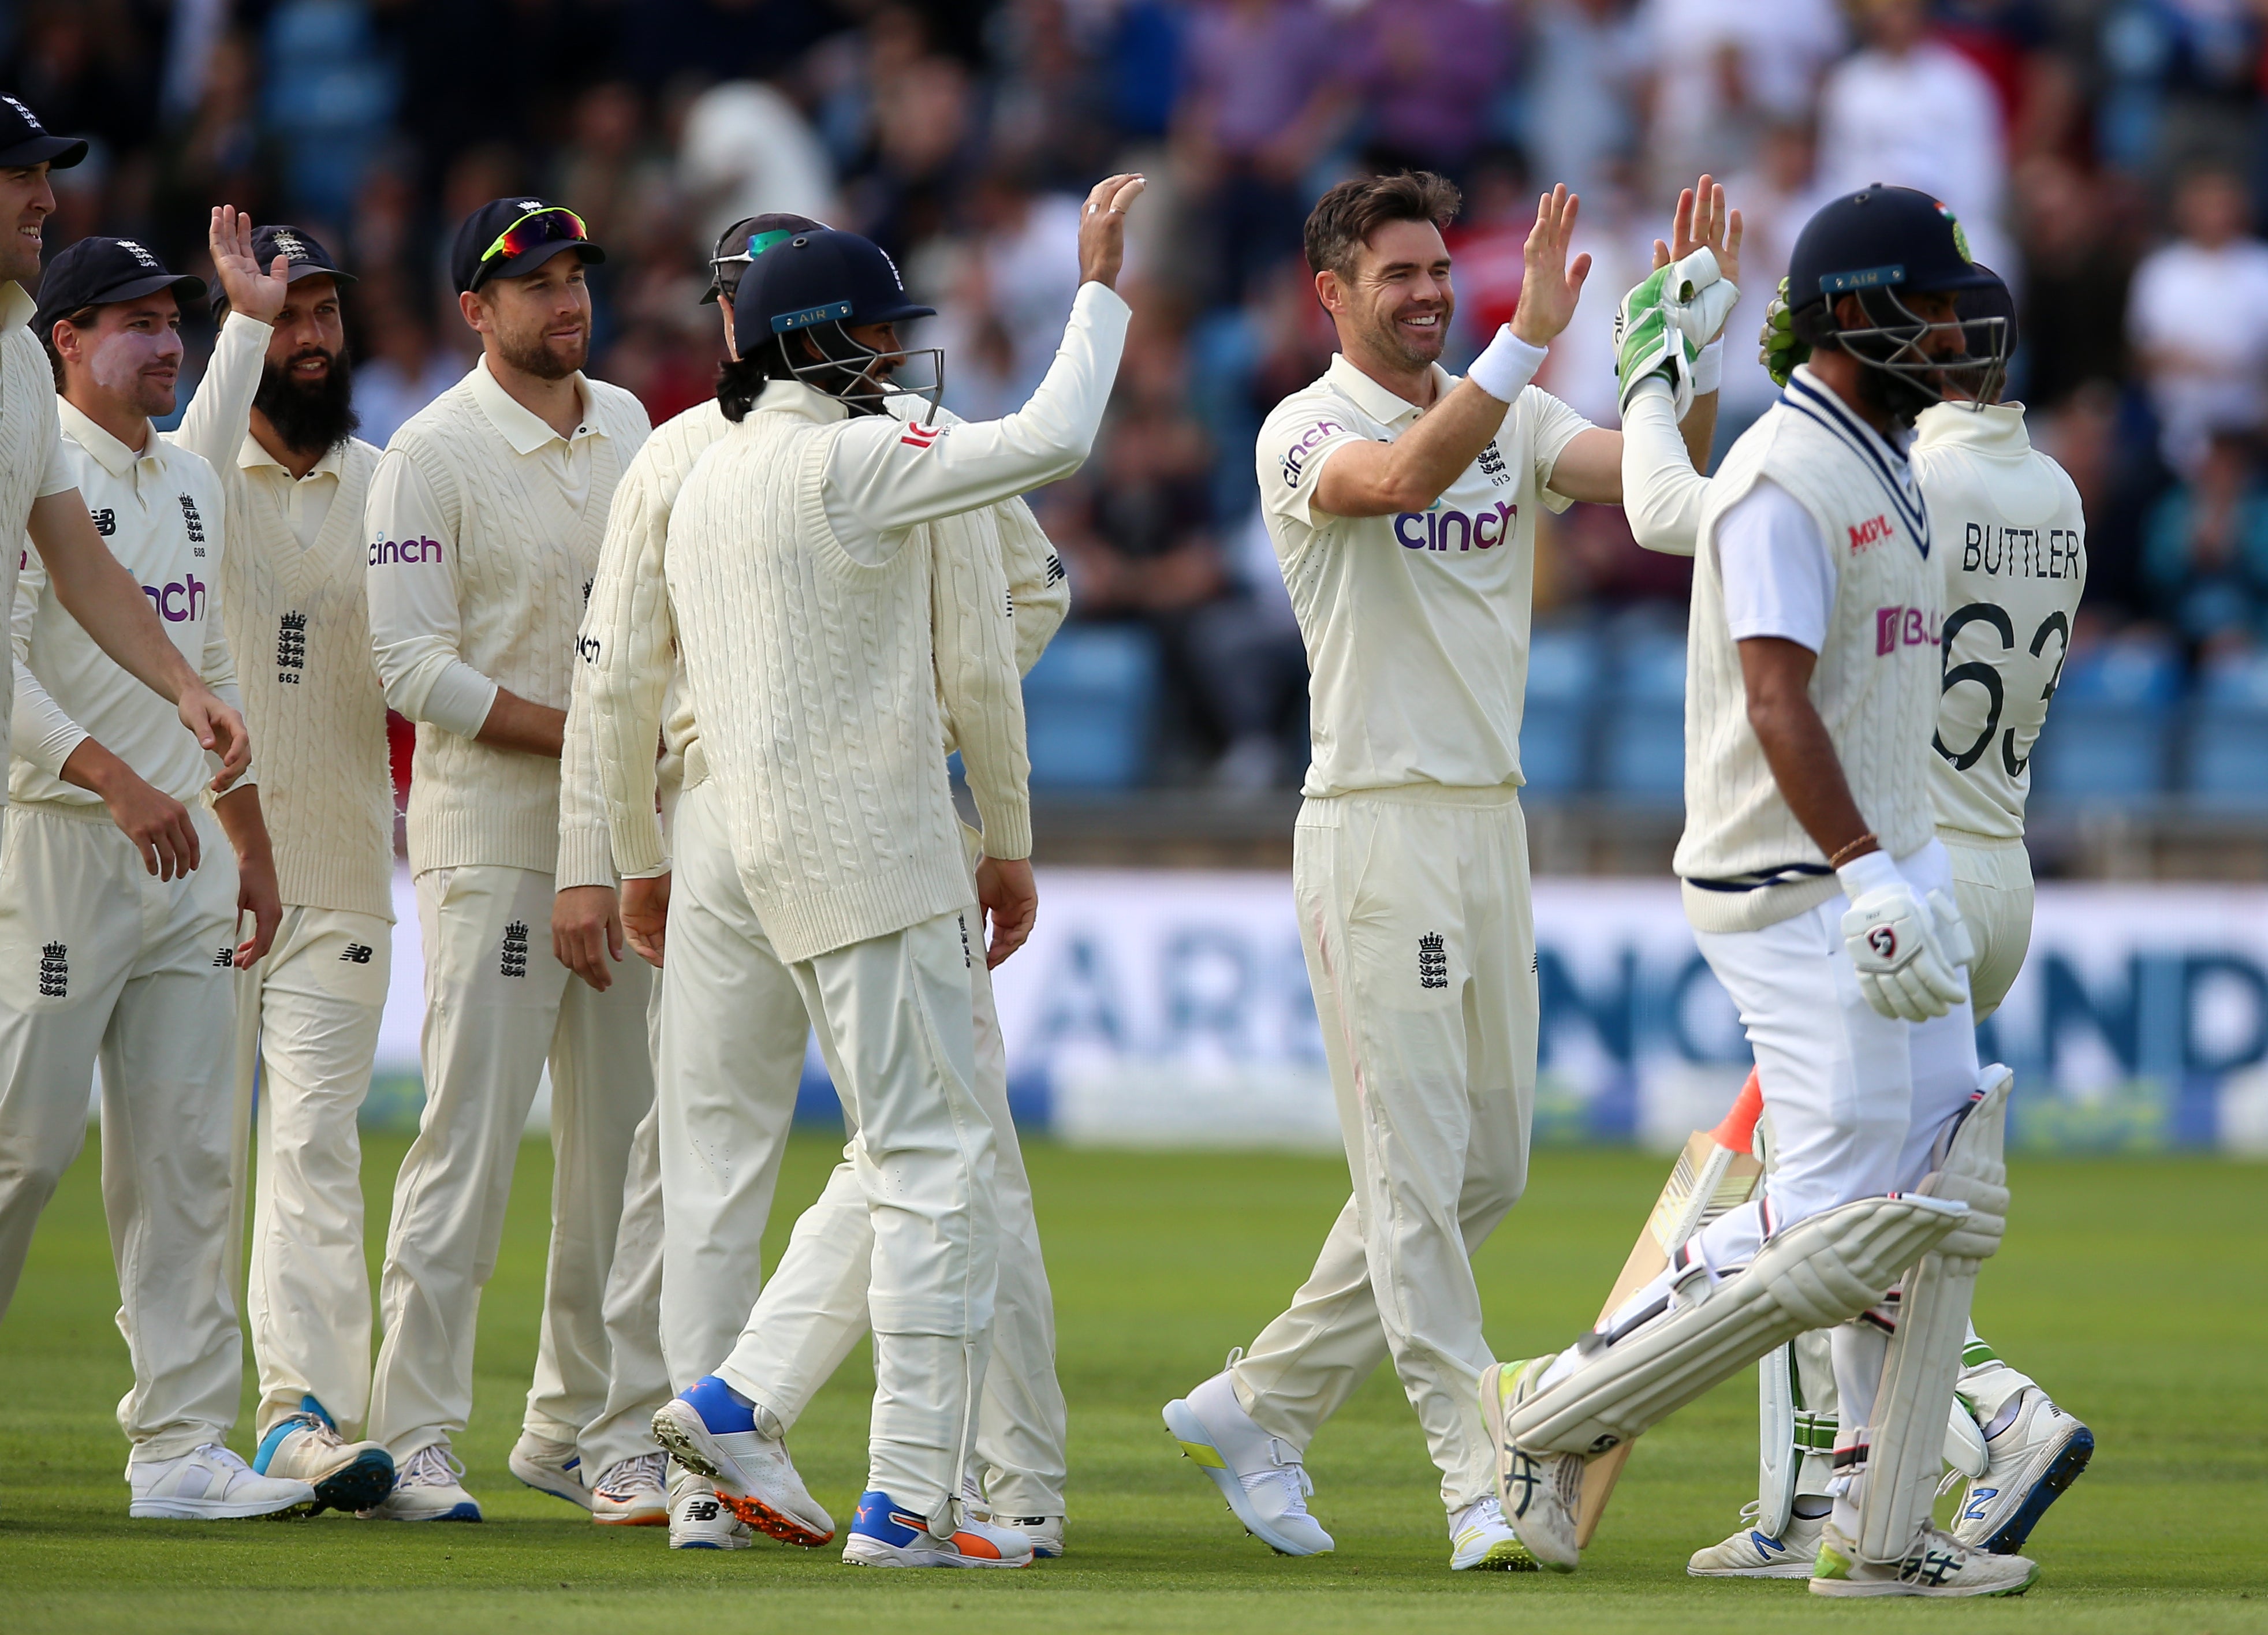 James Anderson led by example for England (Nigel French/PA)